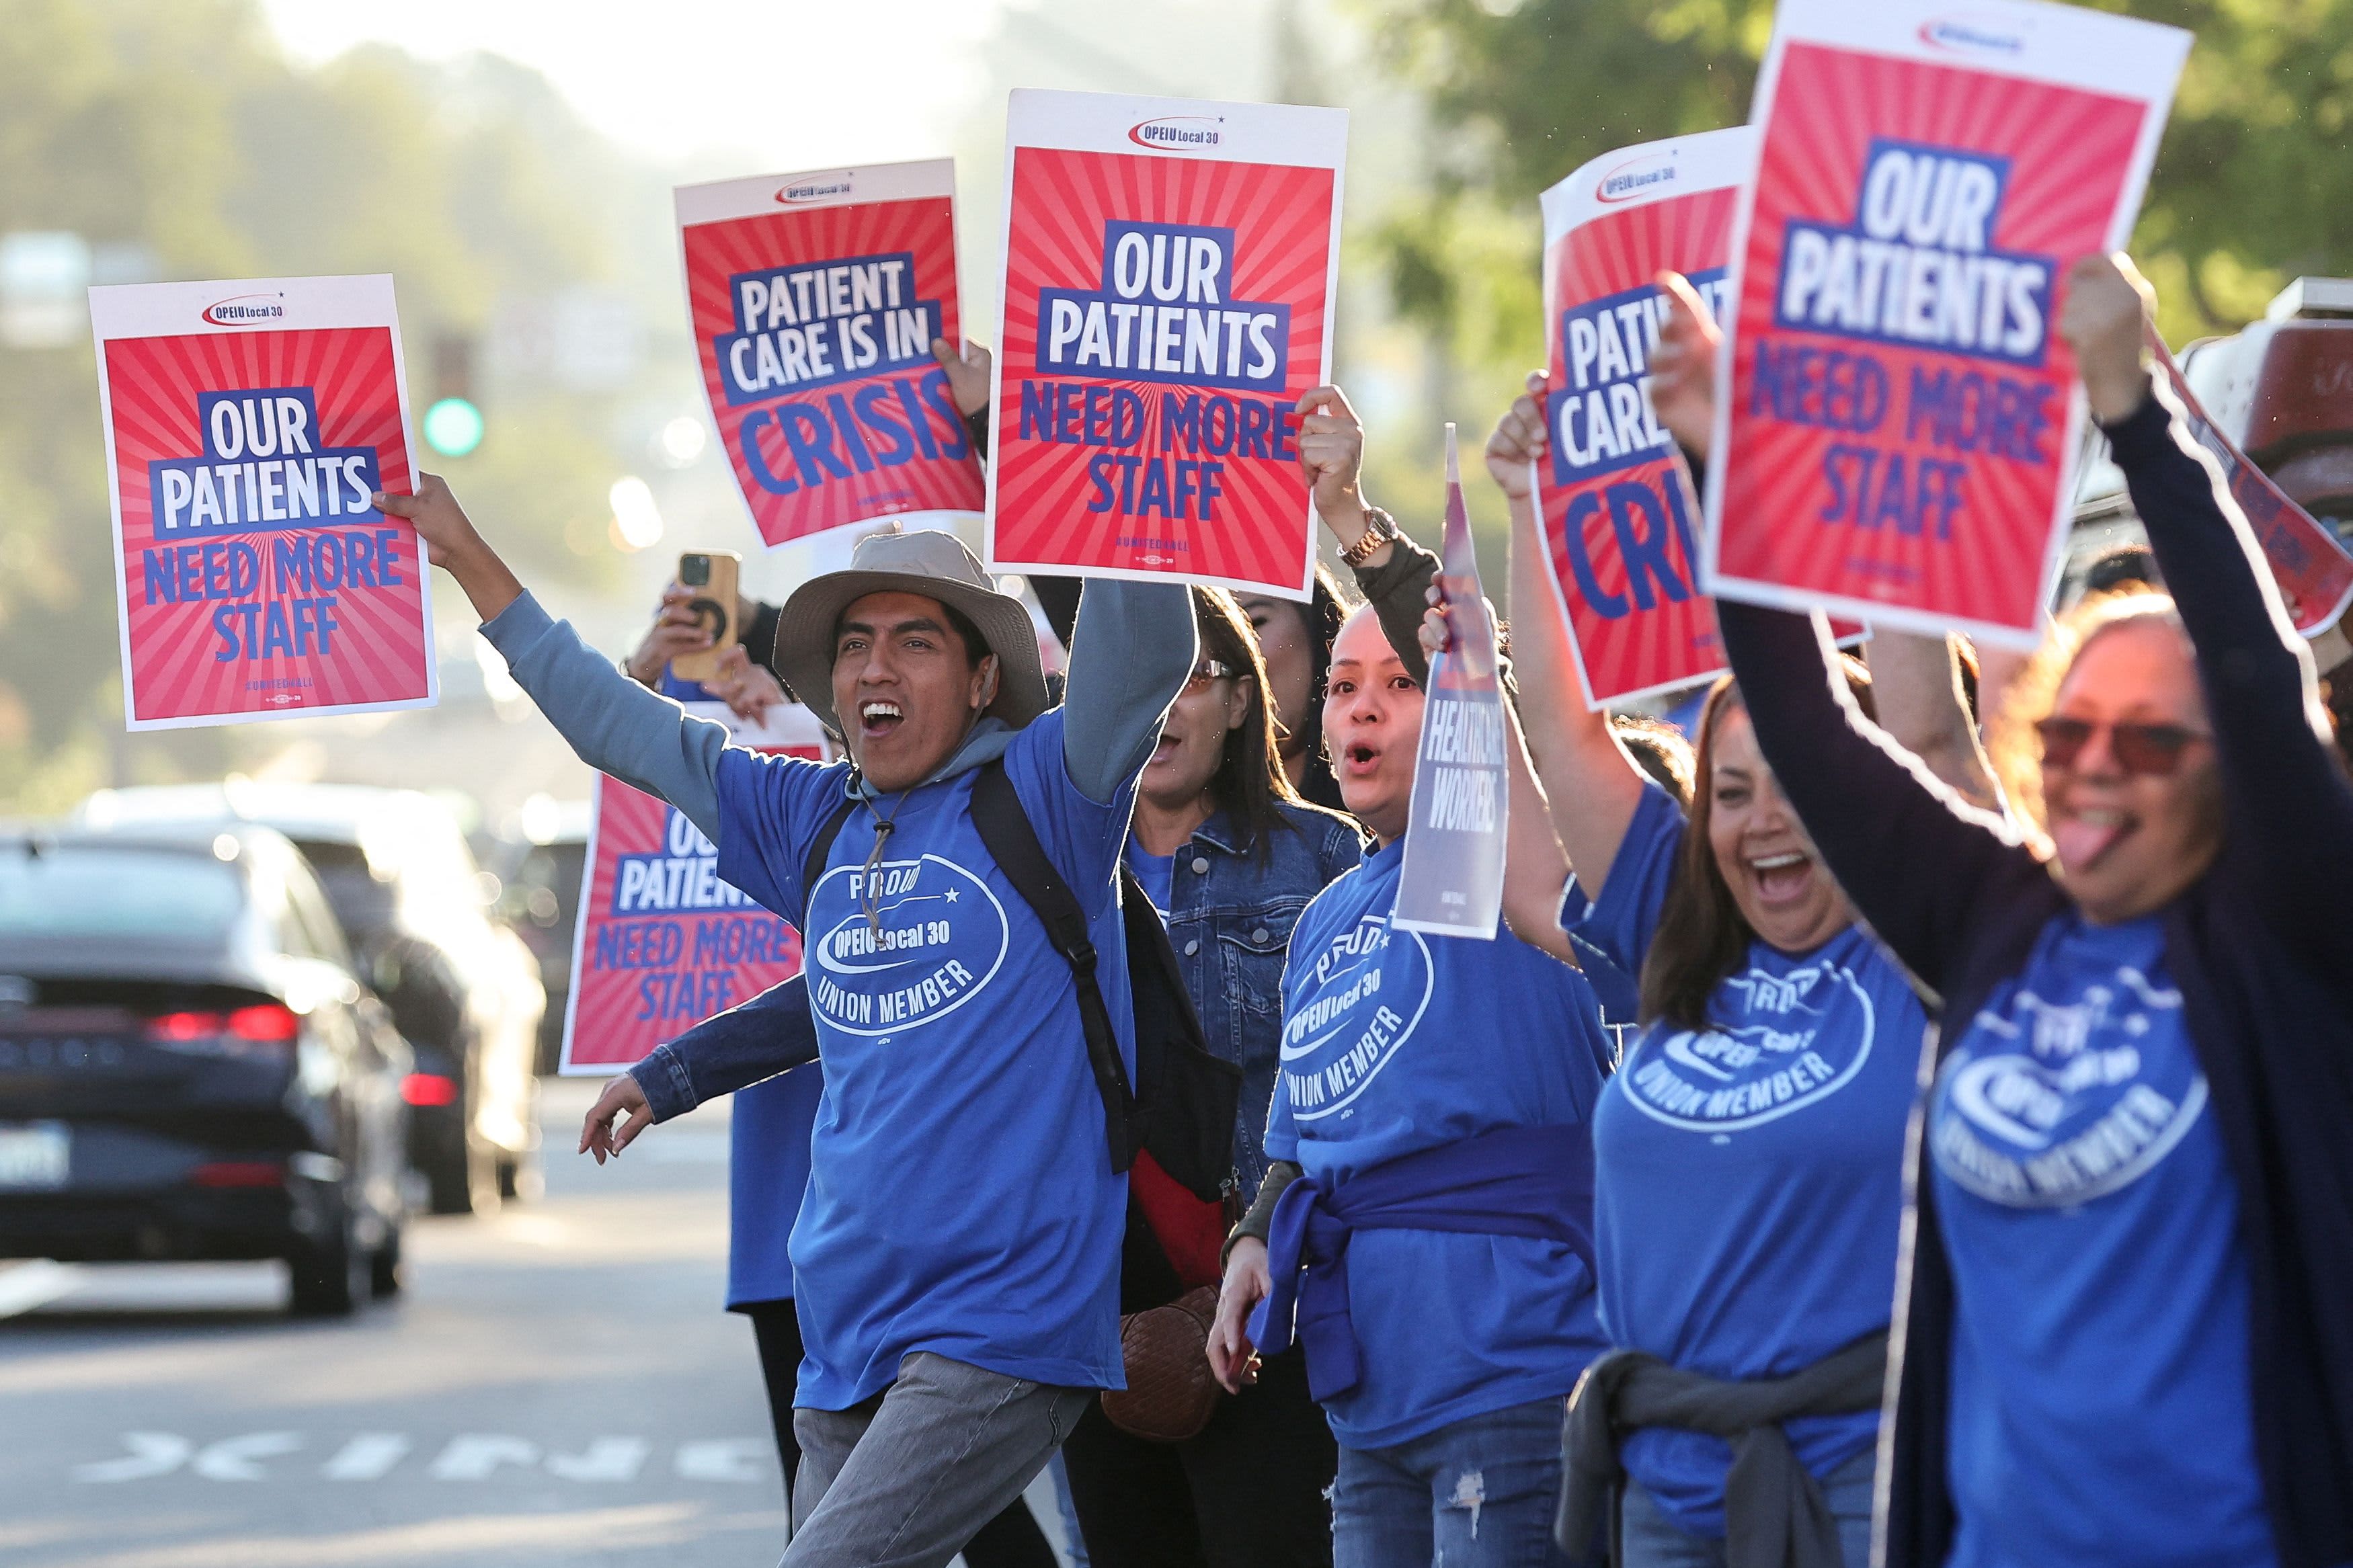 Strikes at Kaiser led to 'historic' raises for CA workers - CalMatters